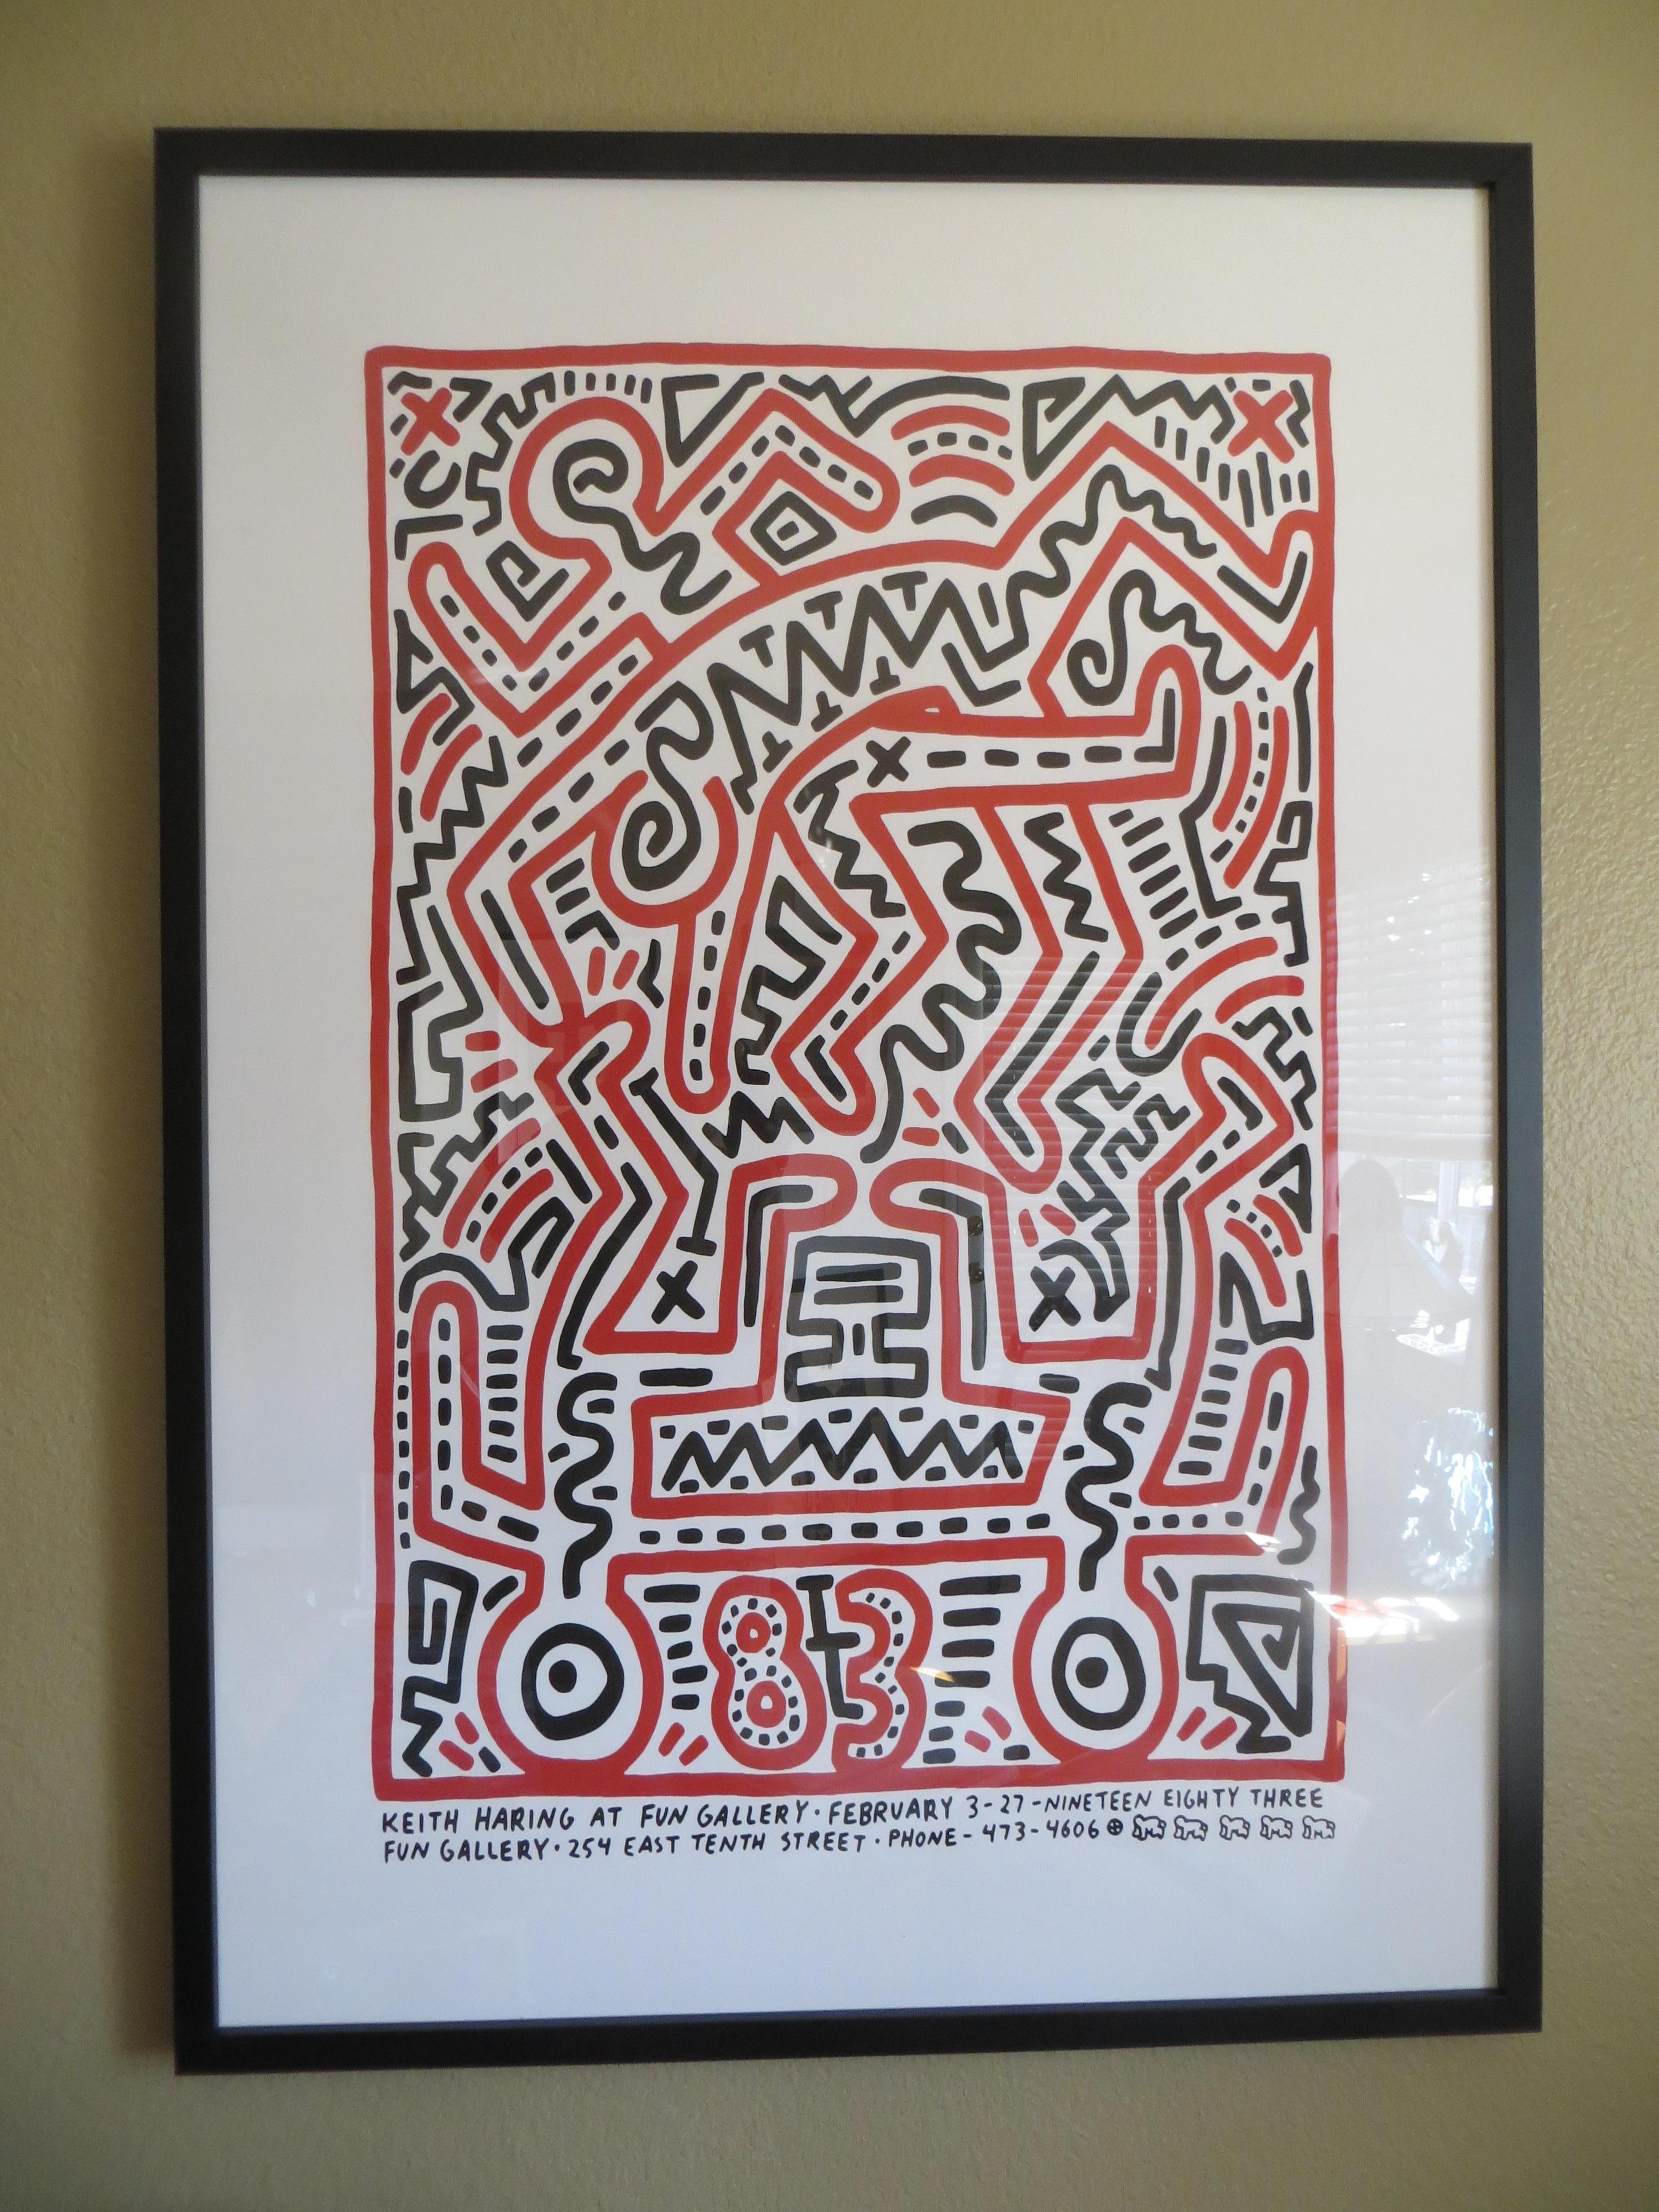 Artwork screem  print by Keiith Haring.
Fun Gallery Exhibition 1983  
In 1983 Keith Haring produced this image for his upcoming exhibition at the Fun Gallery in New York which was founded by film stars Patti Astor and Bill Stelling. The gallery was